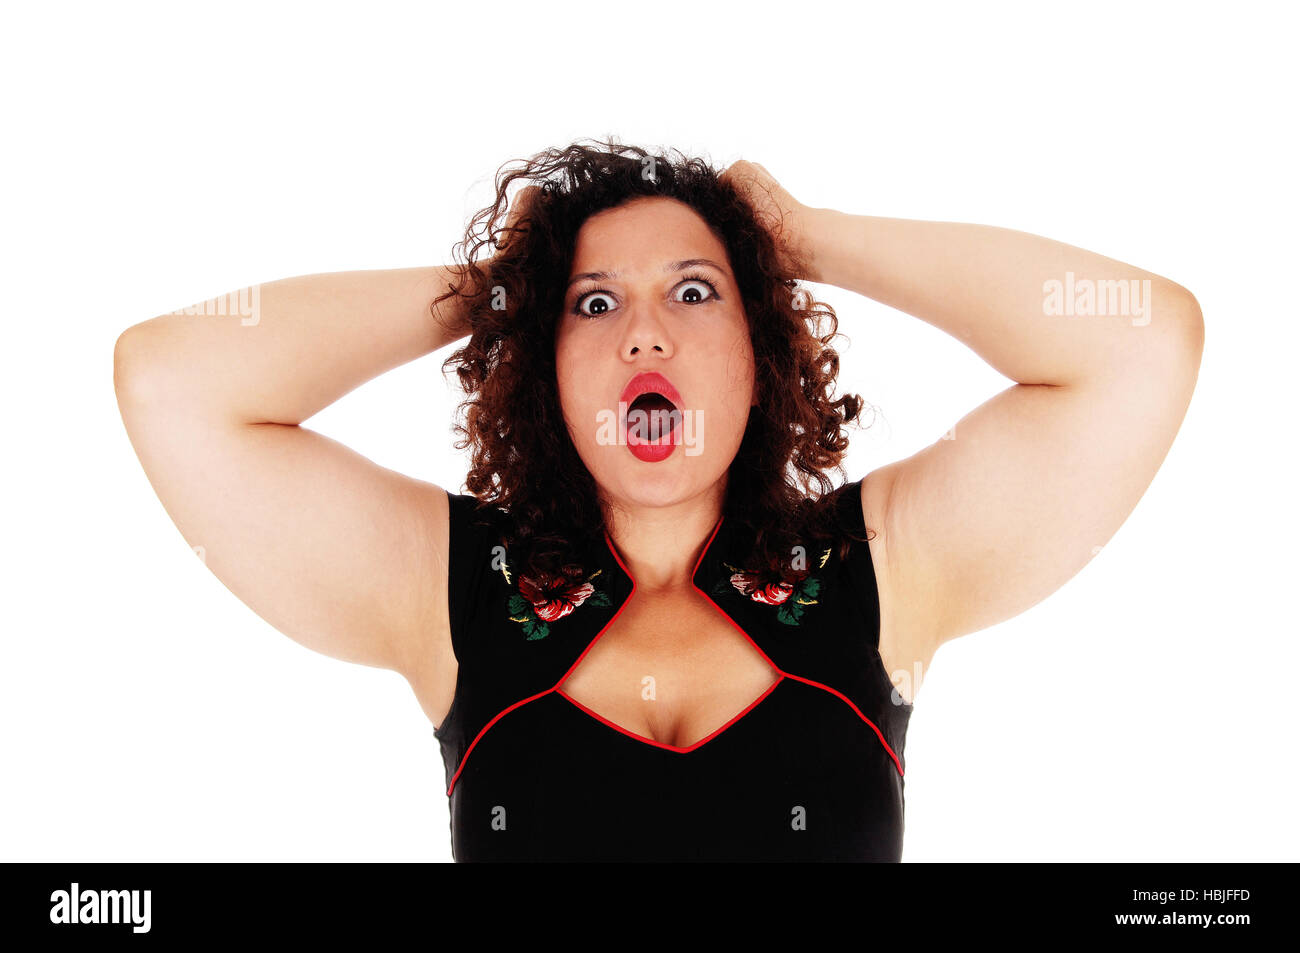 Screaming young woman. Stock Photo